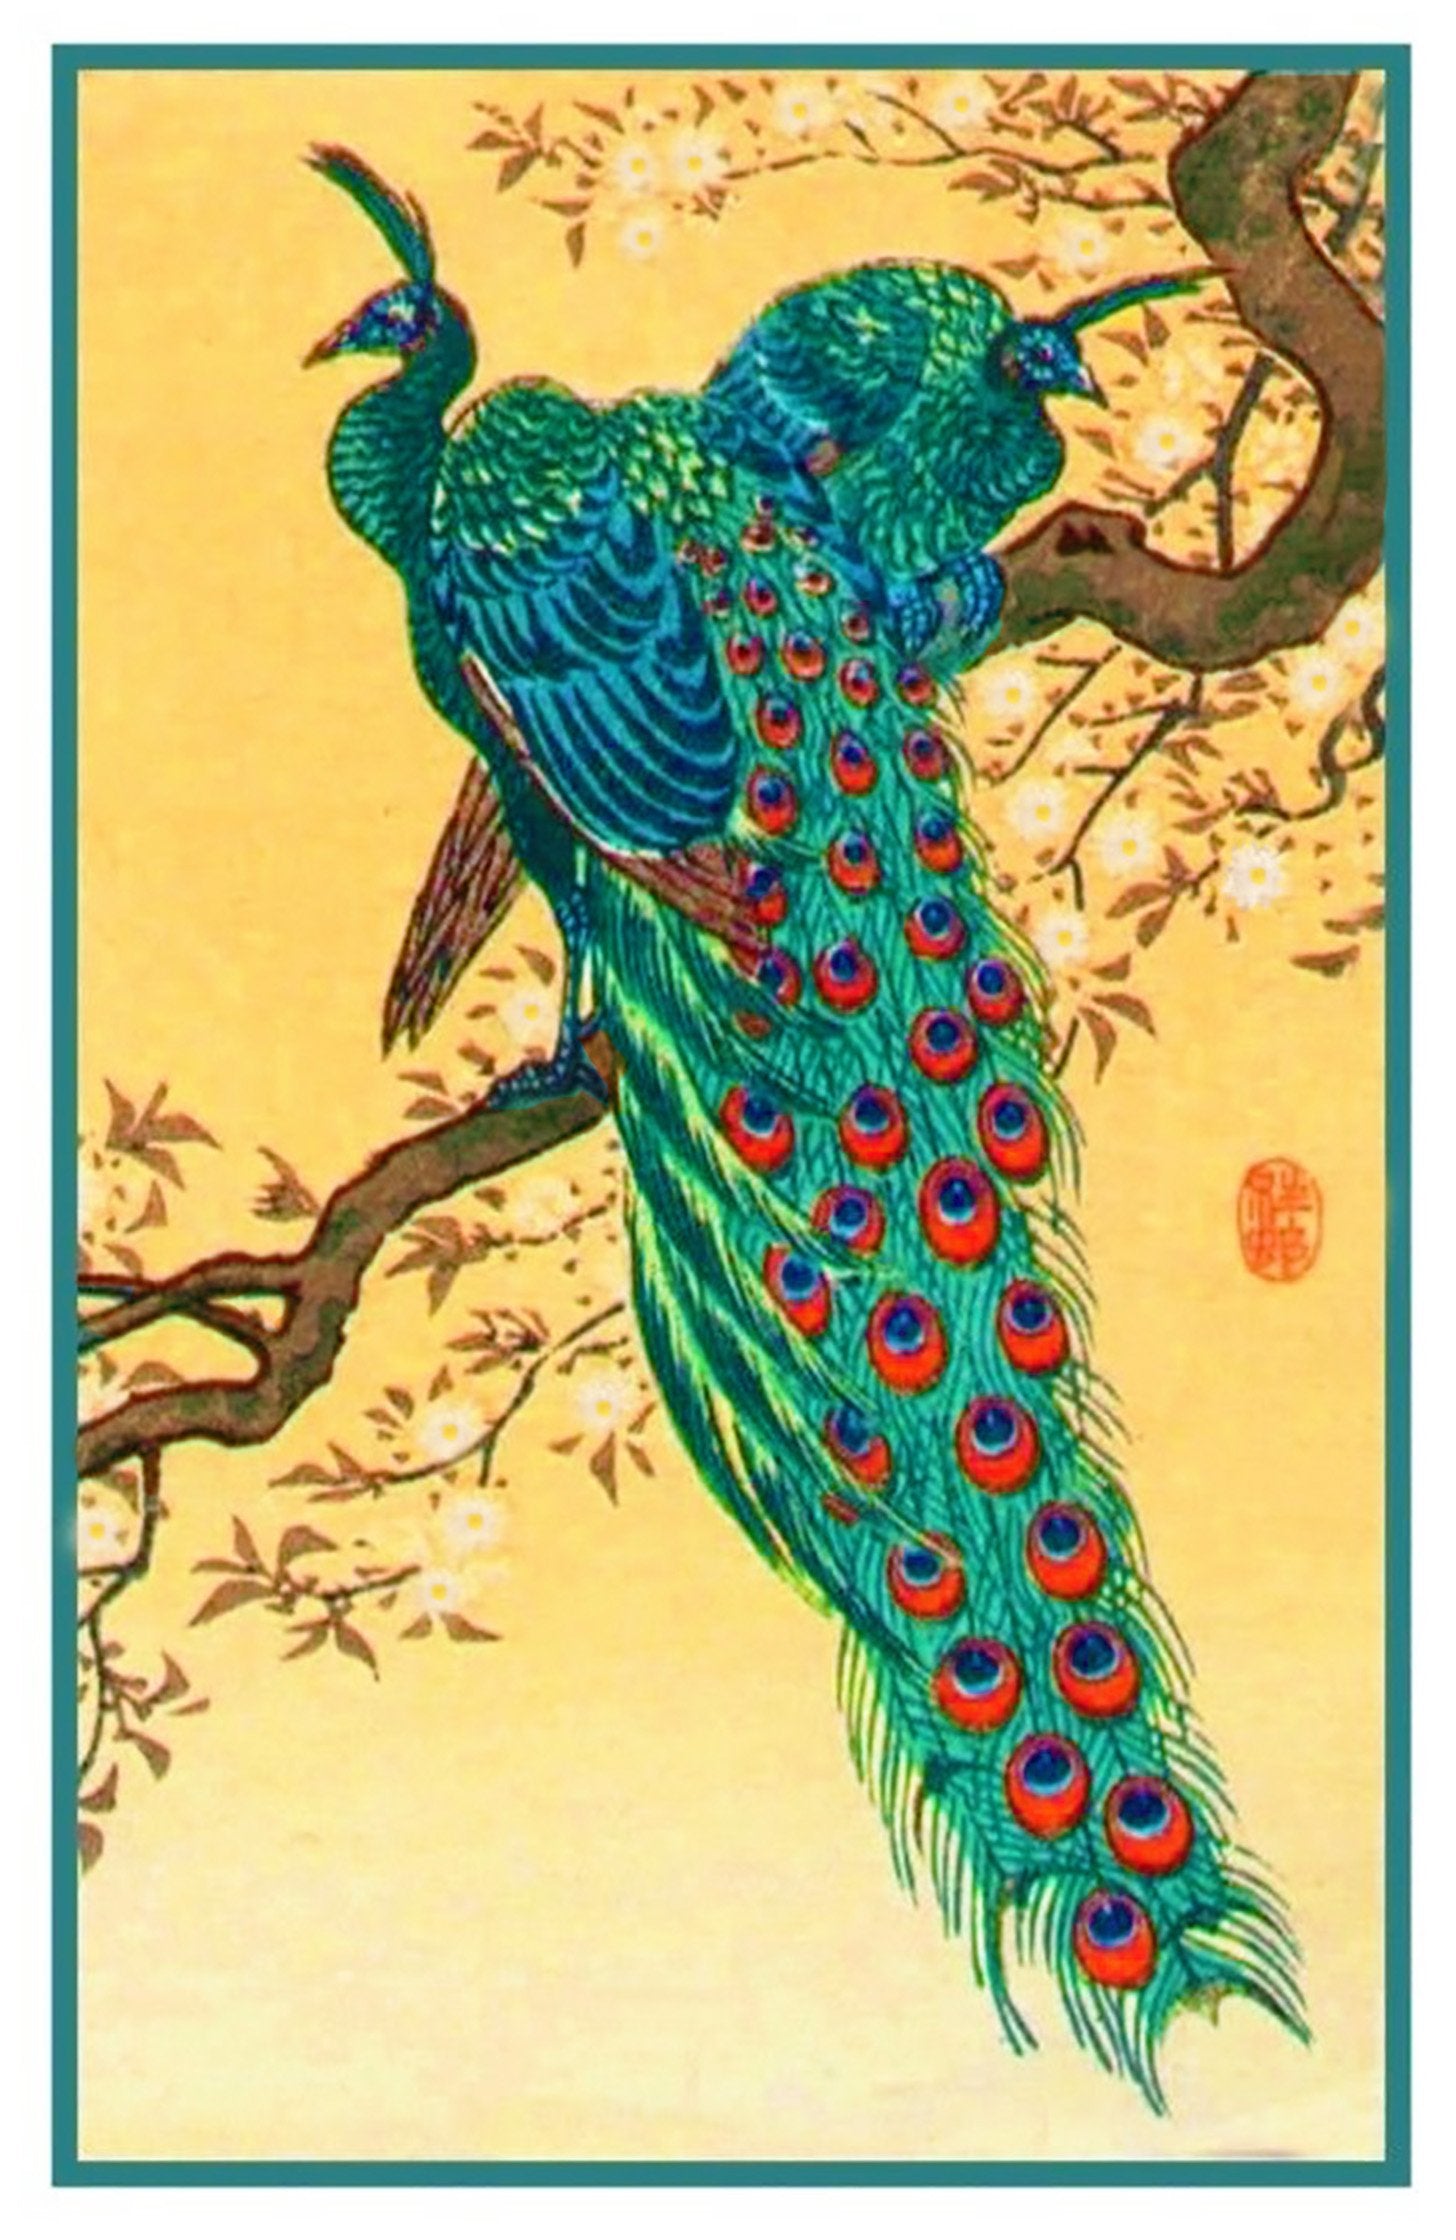 Japanese Artist Ohara Shoson's Peacocks on a Branch Counted Cross Stit ...